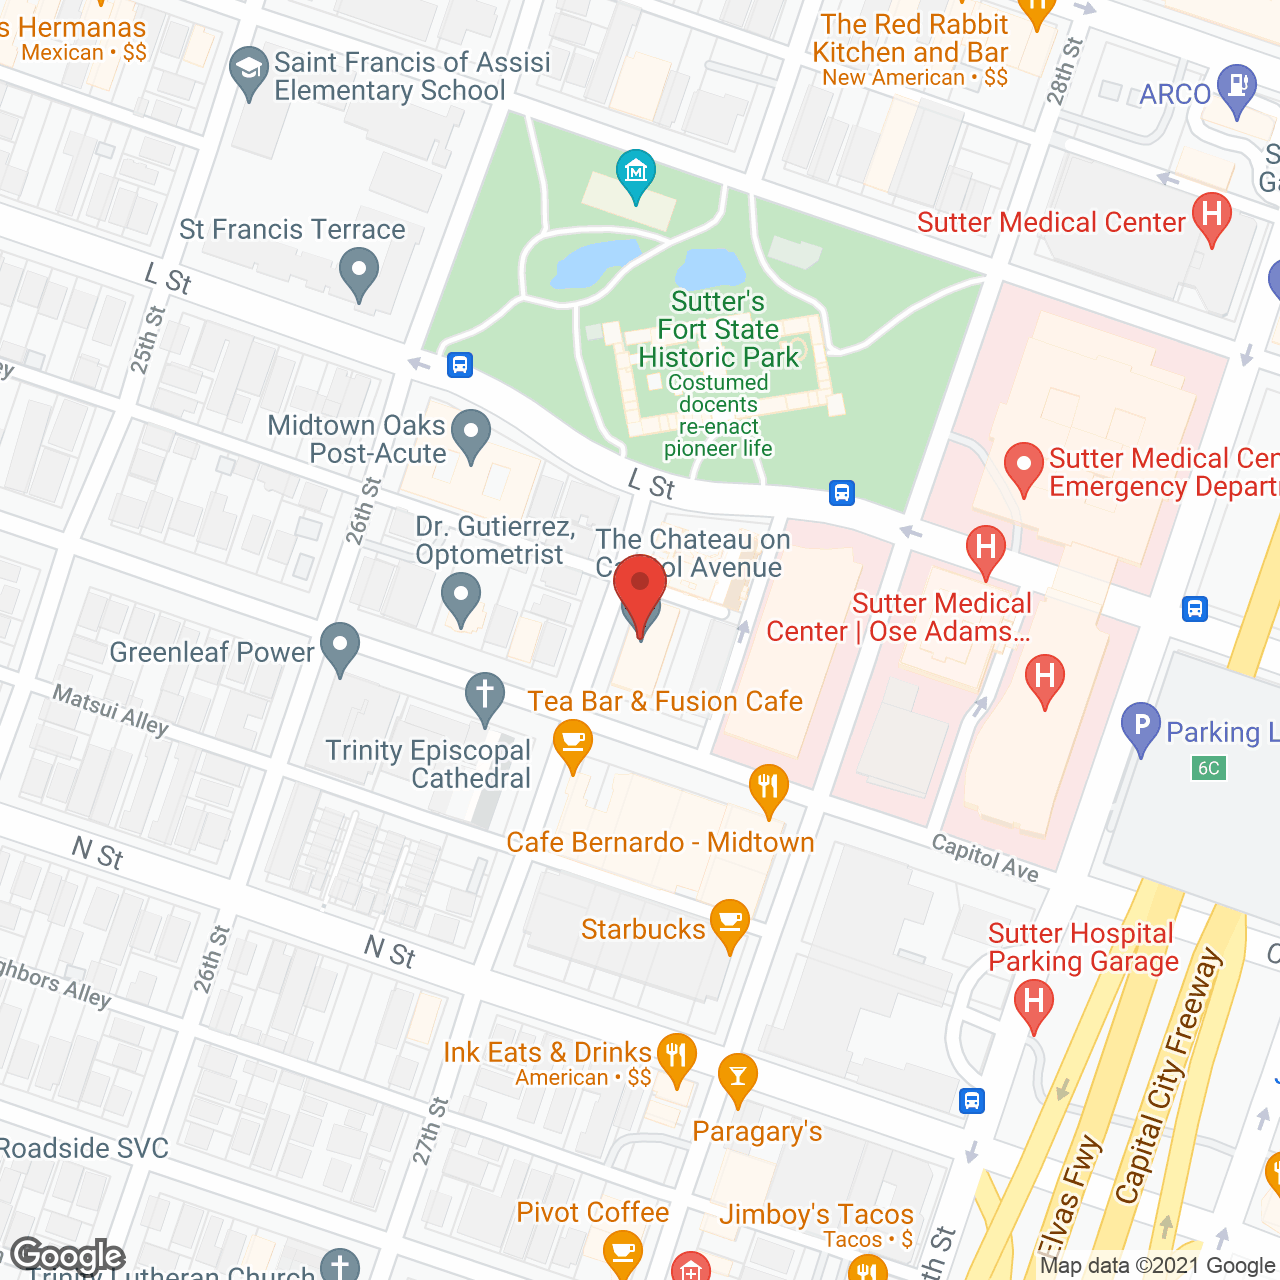 Chateau On Capitol Avenue in google map